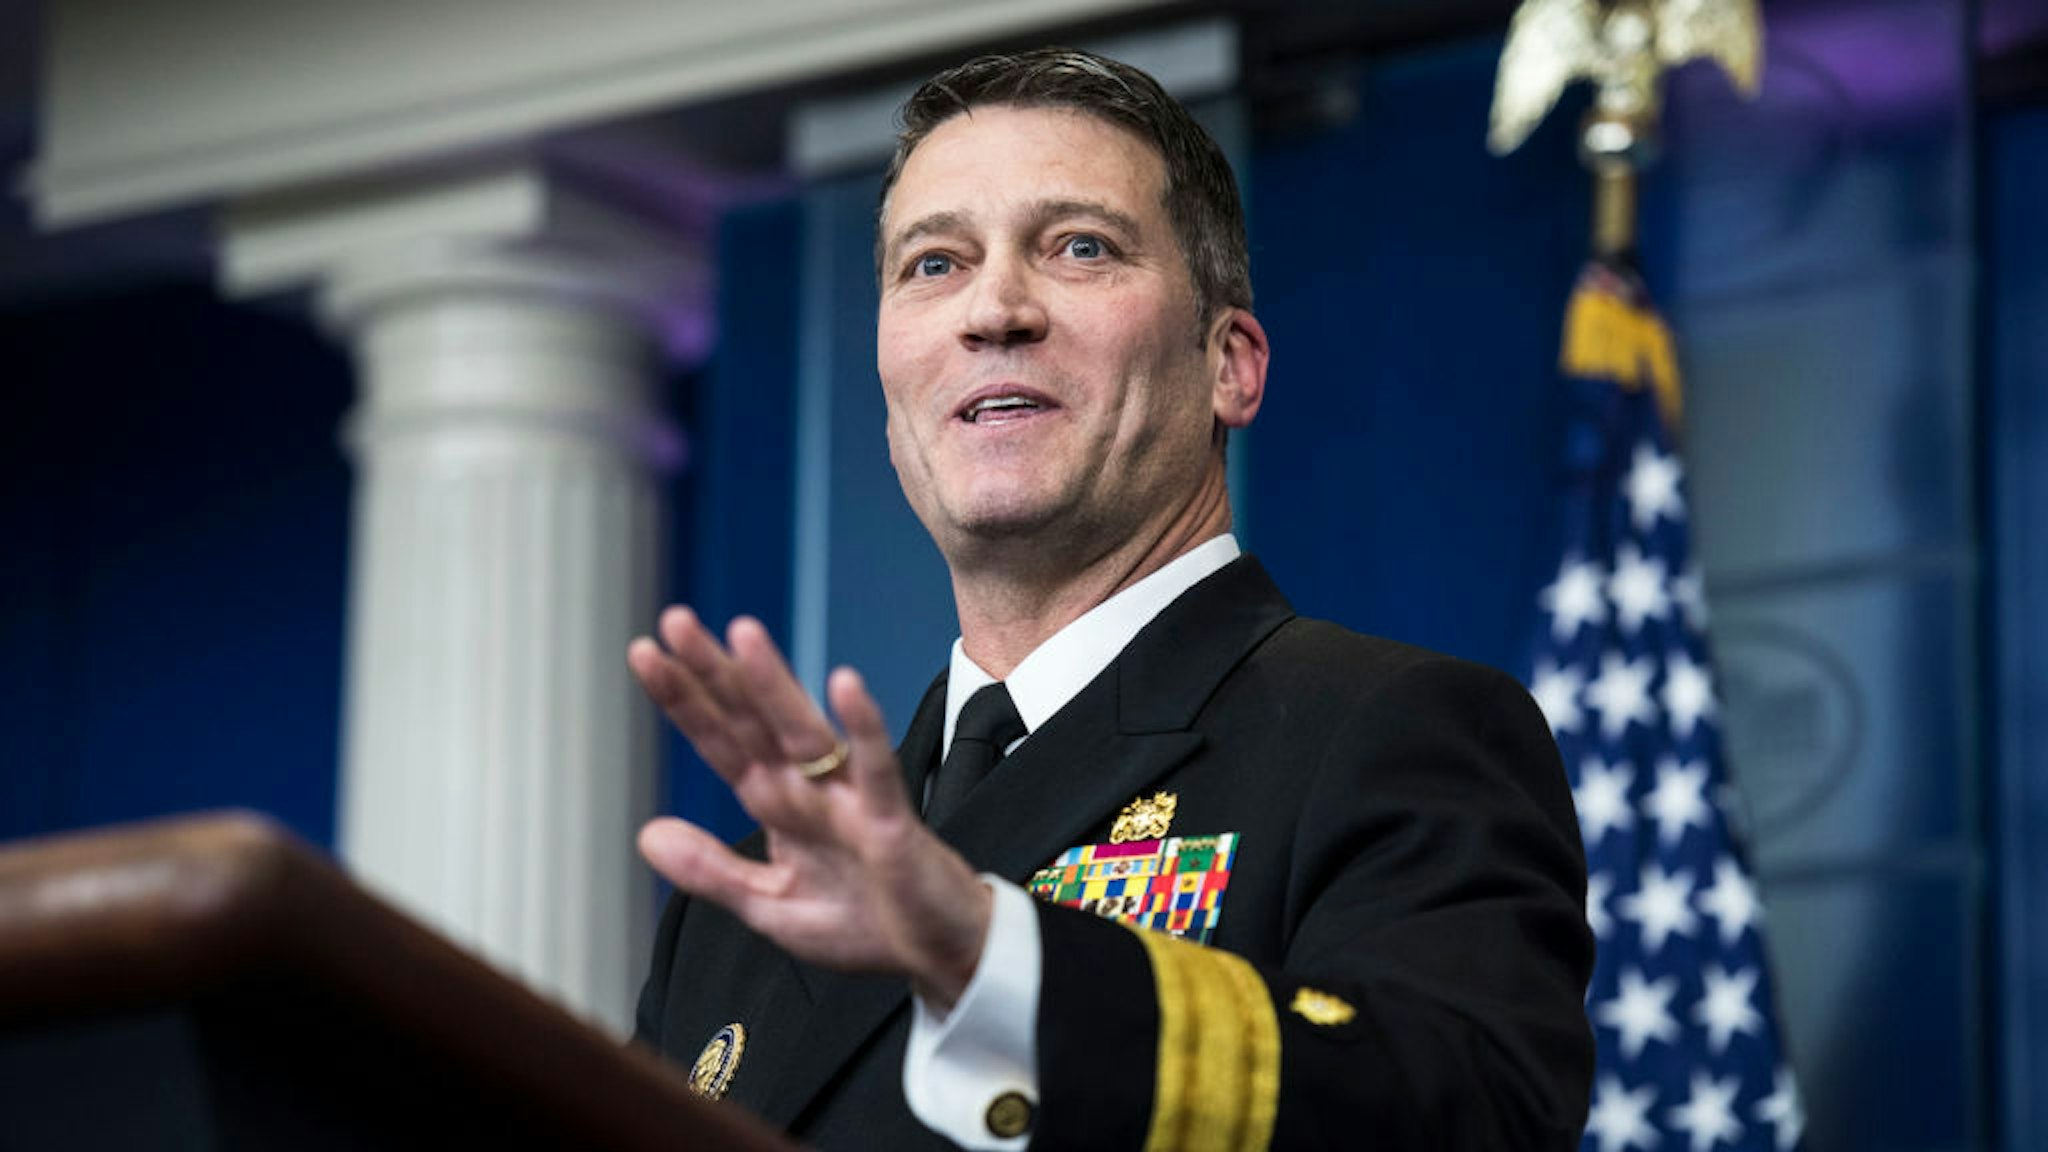 White House physician Dr. Ronny Jackson speaks to reporters during the daily briefing in the Brady press briefing room at the White House in Washington, DC on Tuesday, Jan. 16, 2018.